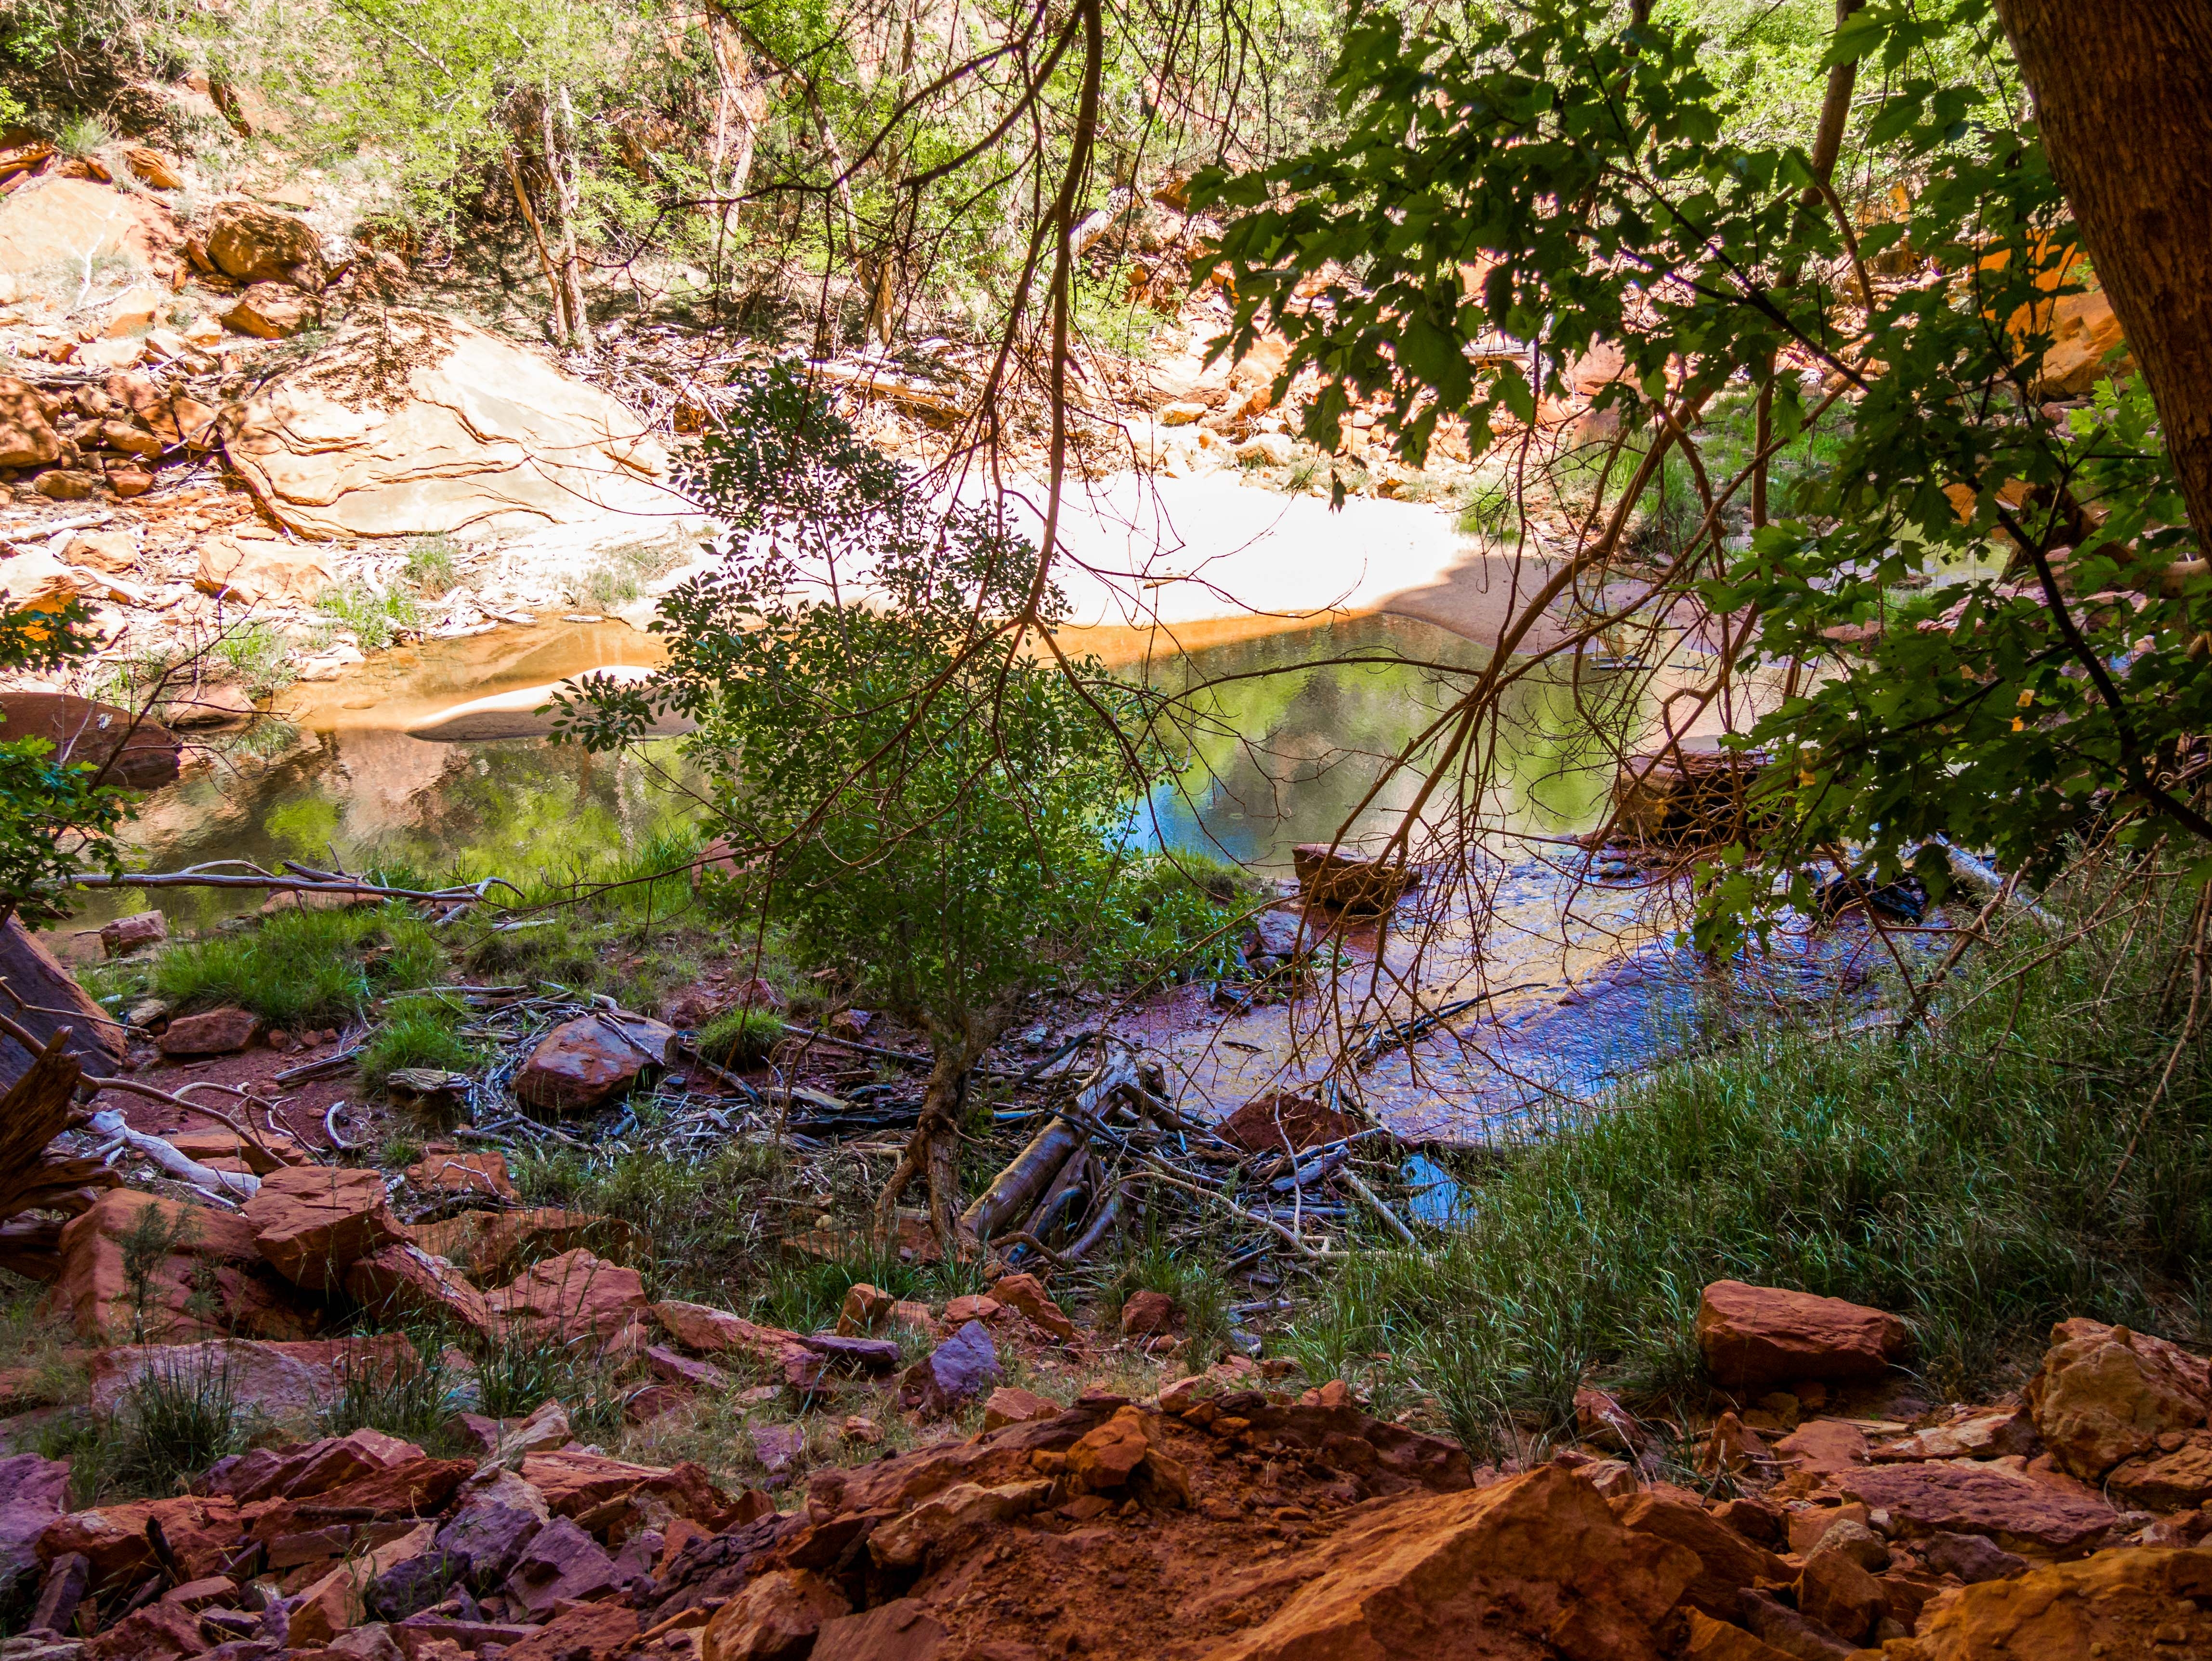 the Lower Emerald Pool in Zion National Park